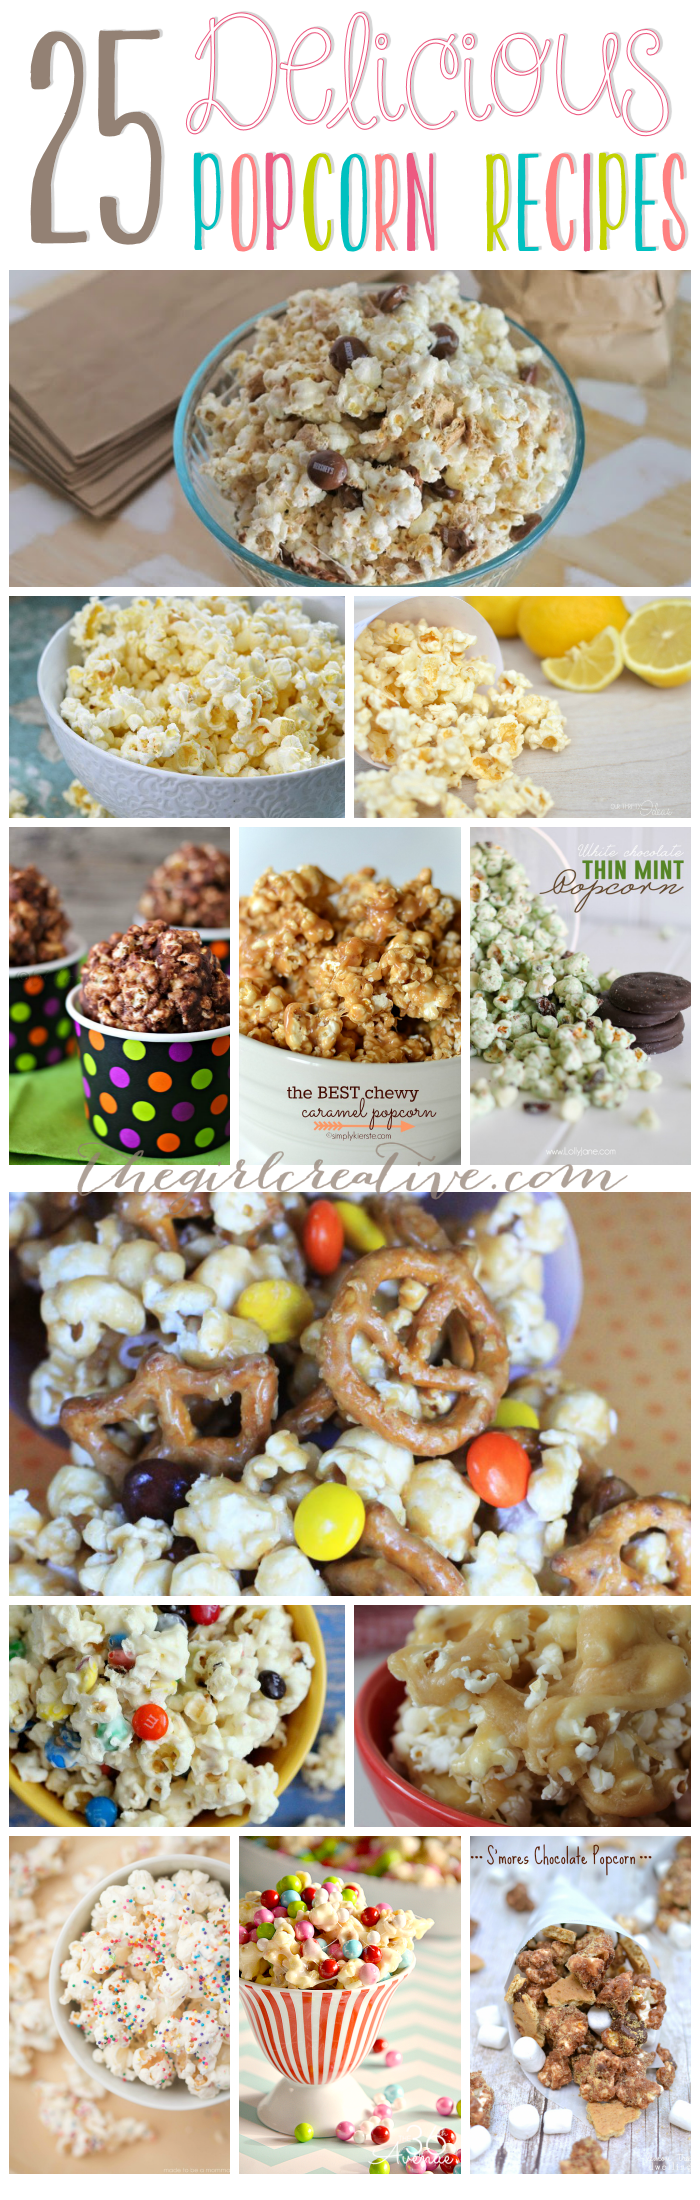 Delicious popcorn recipes | Salty and Sweet popcorn recipes.